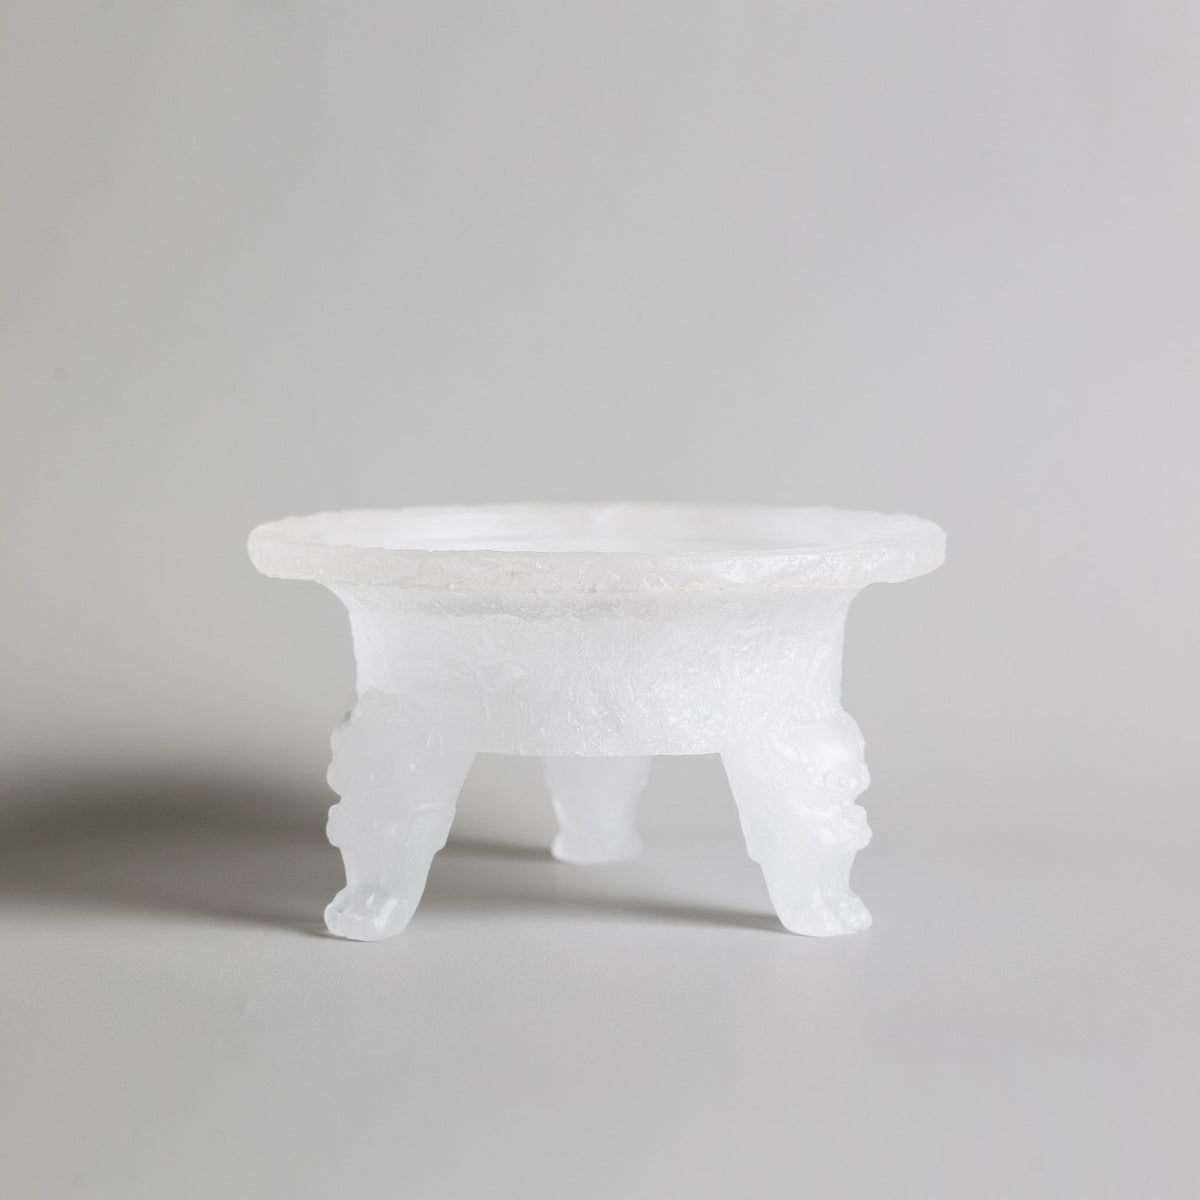 The liuli glass body of a powder incense burner with suanni lion legs